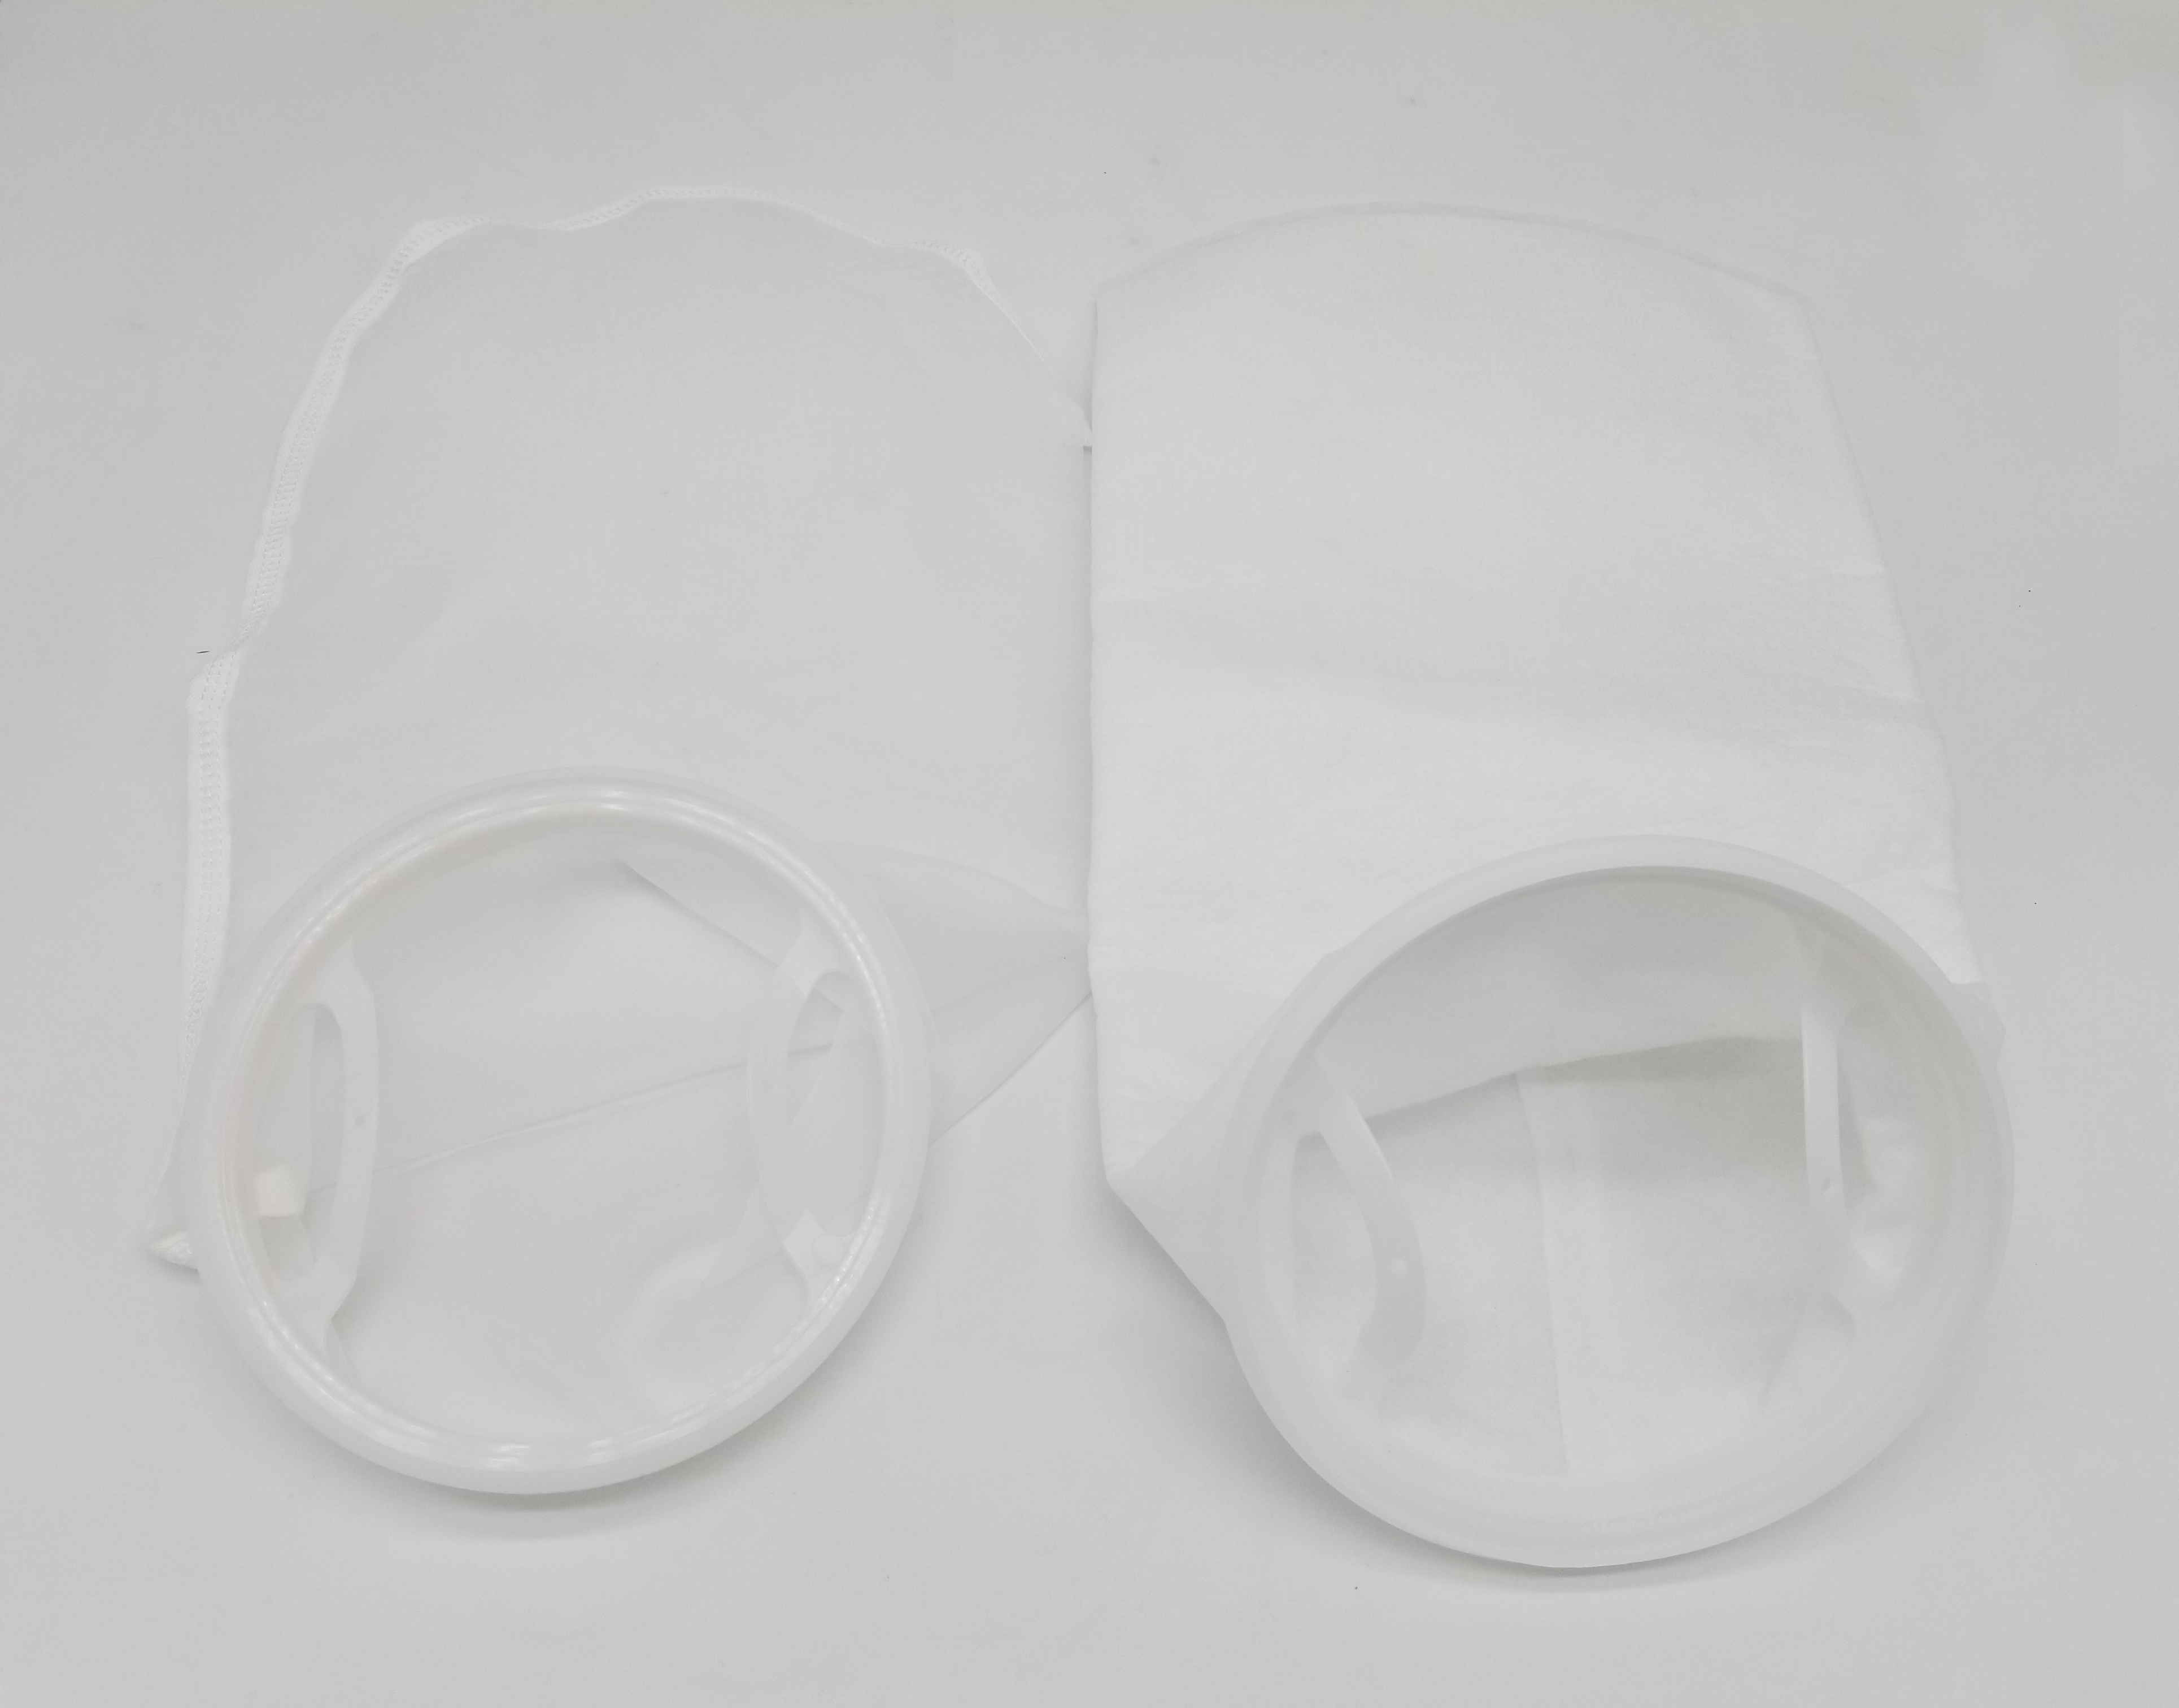 PP PE Nylon Liquid Filter Bags Filter Sock 100 Micron for Oil and More Liquid Filtration